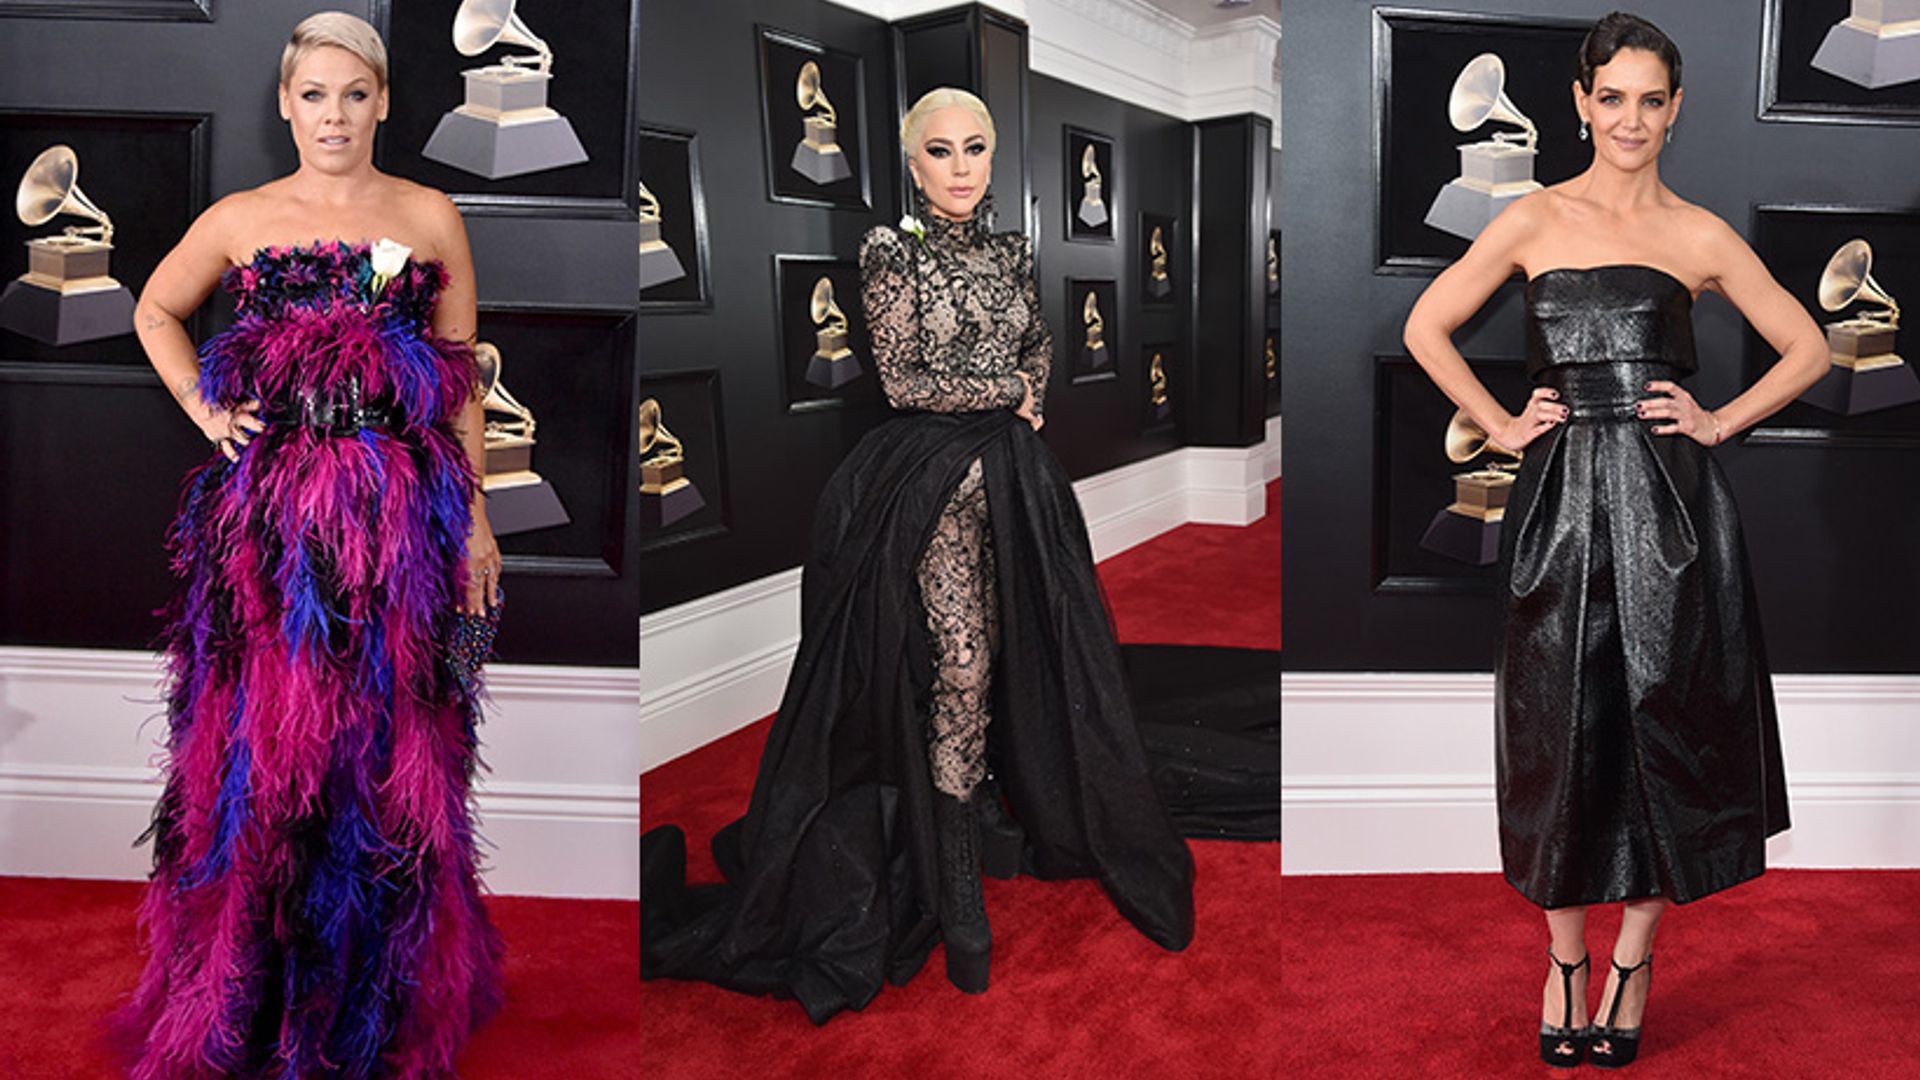 Grammy Awards 2018: The red carpet fashion from the 60th annual ceremony